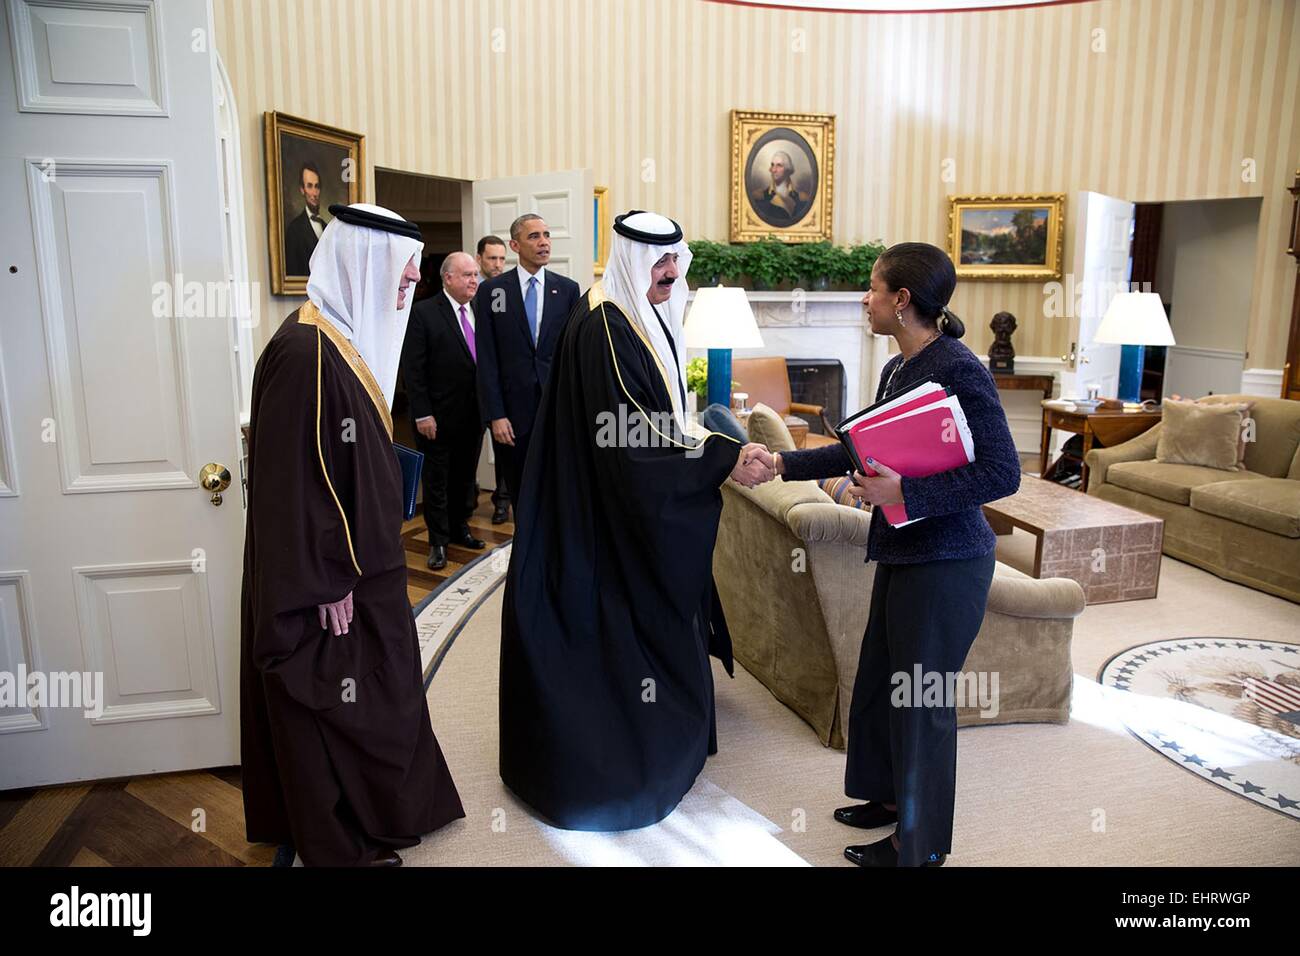 National Security Advisor Susan E. Rice greets Prince Mitib bin Abdallah bin Abd al-Aziz Al Saud, Saudi Arabia's Minister of the National Guard, prior to a meeting with President Barack Obama in the Oval Office of the White House November 19, 2014 in Washington, DC. At left is Adel Al-Jubeir, Saudi Ambassador to the United States. Stock Photo